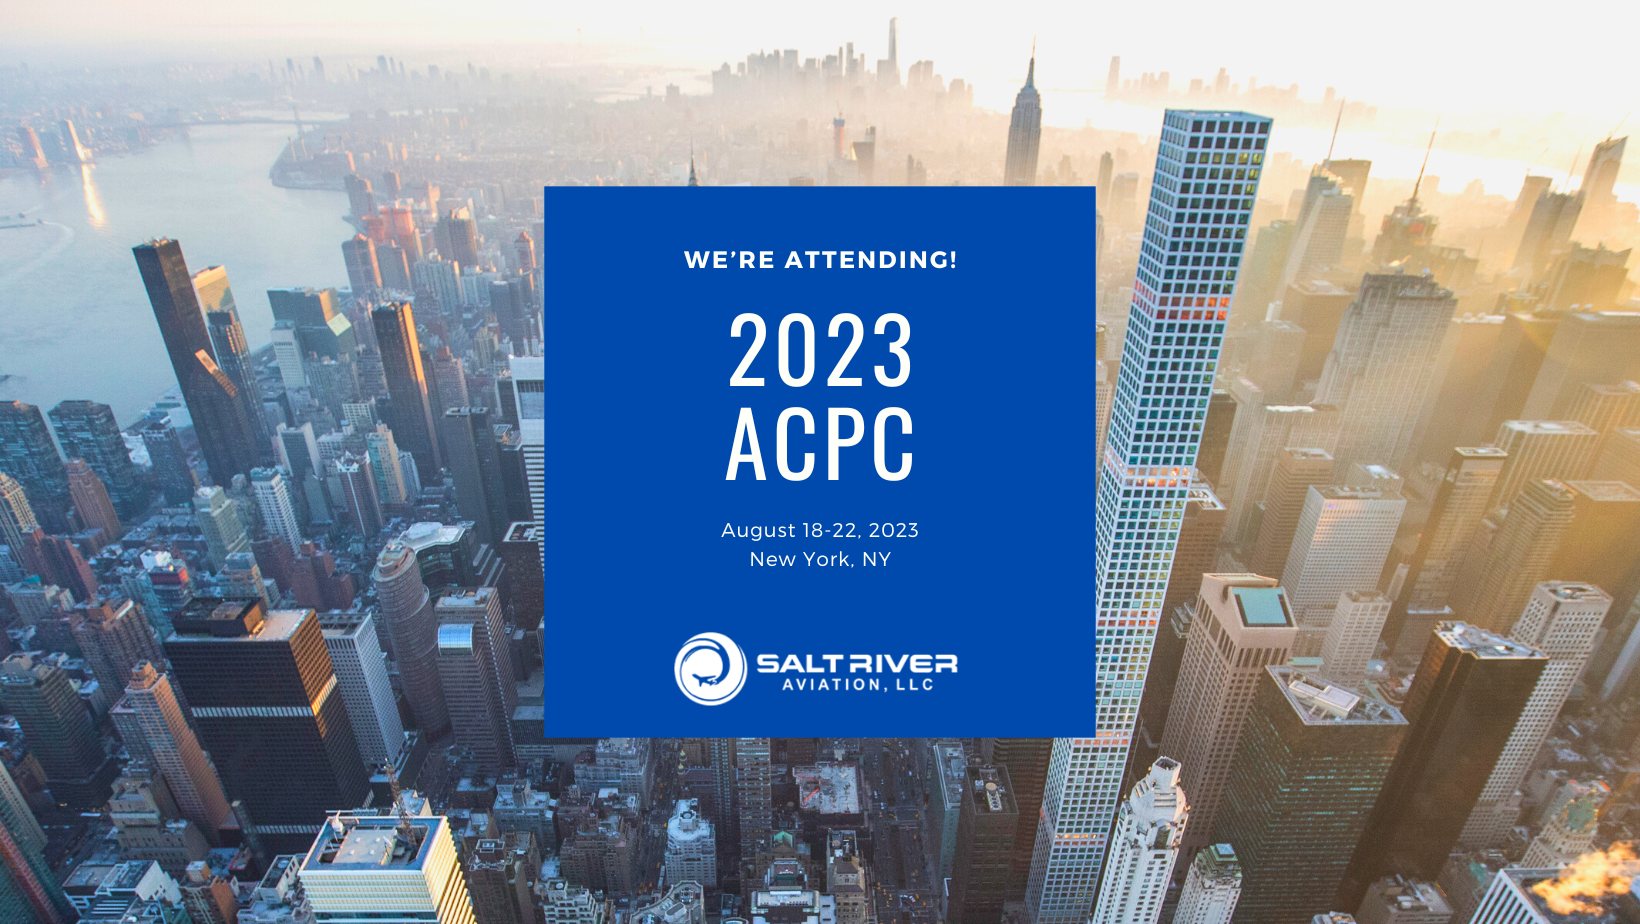 Meet us at ACPC in New York City, NY. August 18-22, 2023!